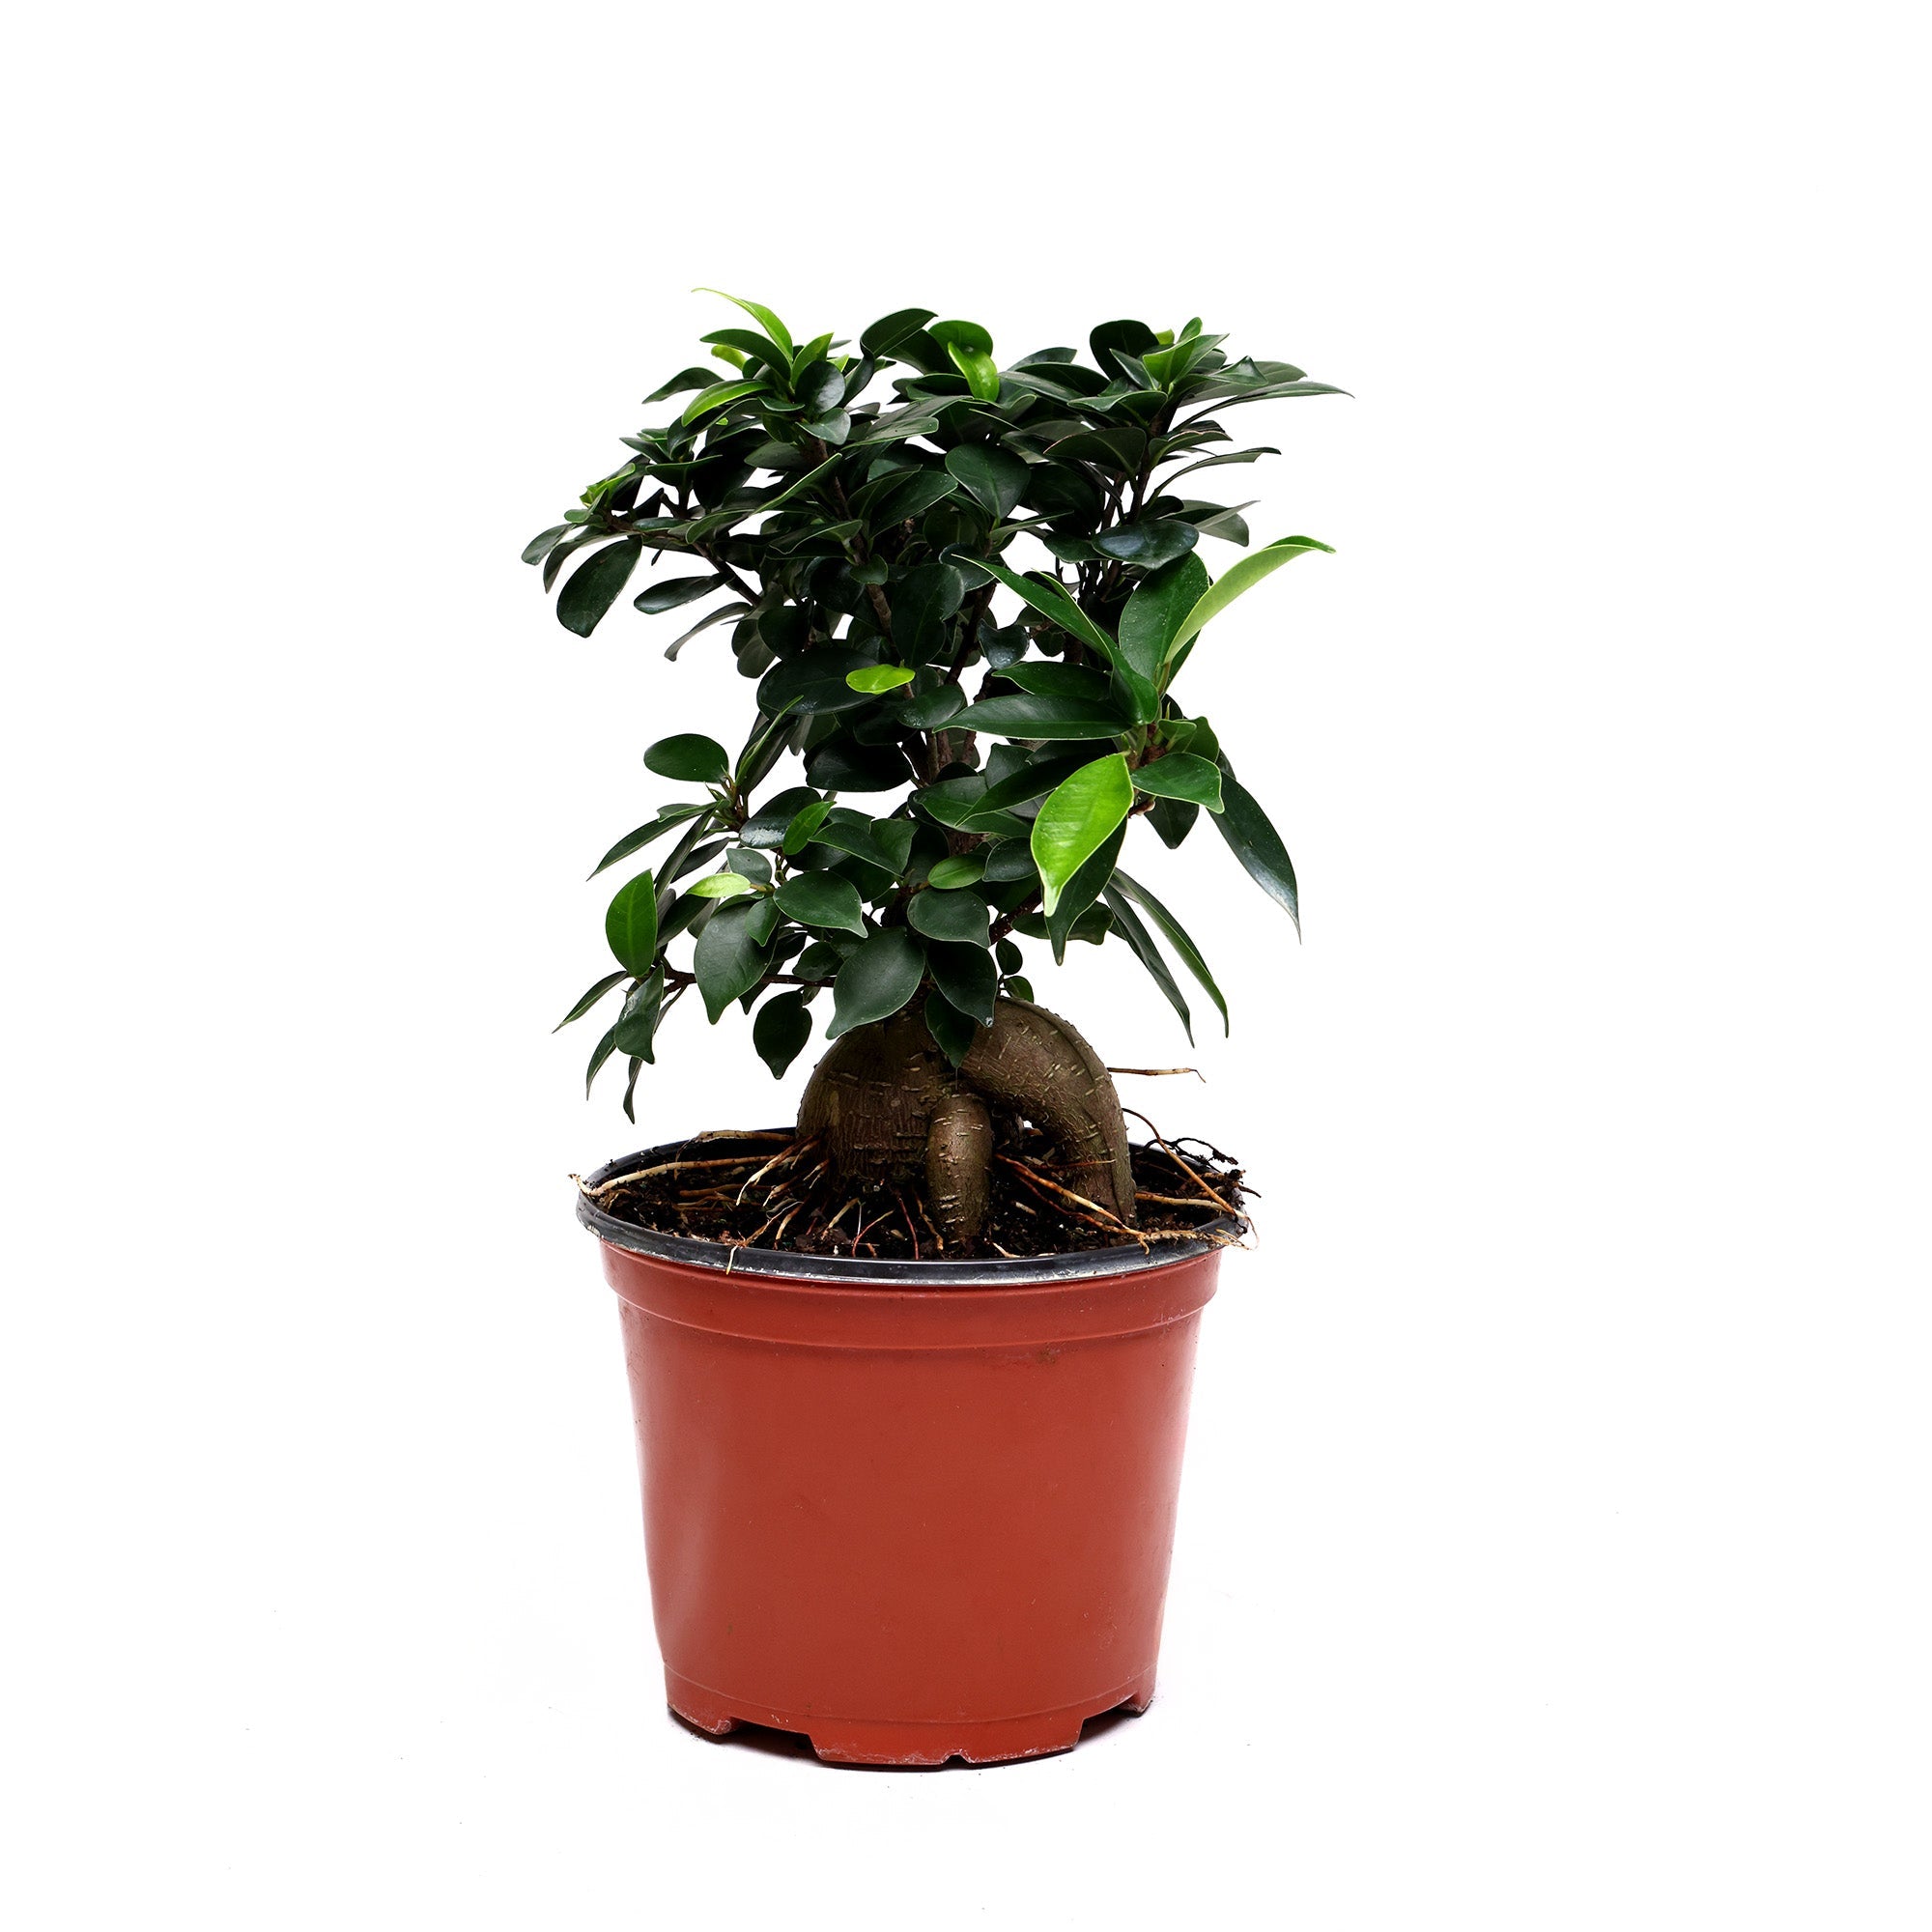 A small bonsai tree with dense, dark green leaves is potted in a simple, red plastic pot. The tree, a Ficus Microcarpa 6 Inch Pot from Chive Studio 2024, has a thick trunk with visible roots emerging above the soil. Perfect for indoor plant decor, its vibrant presence is highlighted against the plain white background.